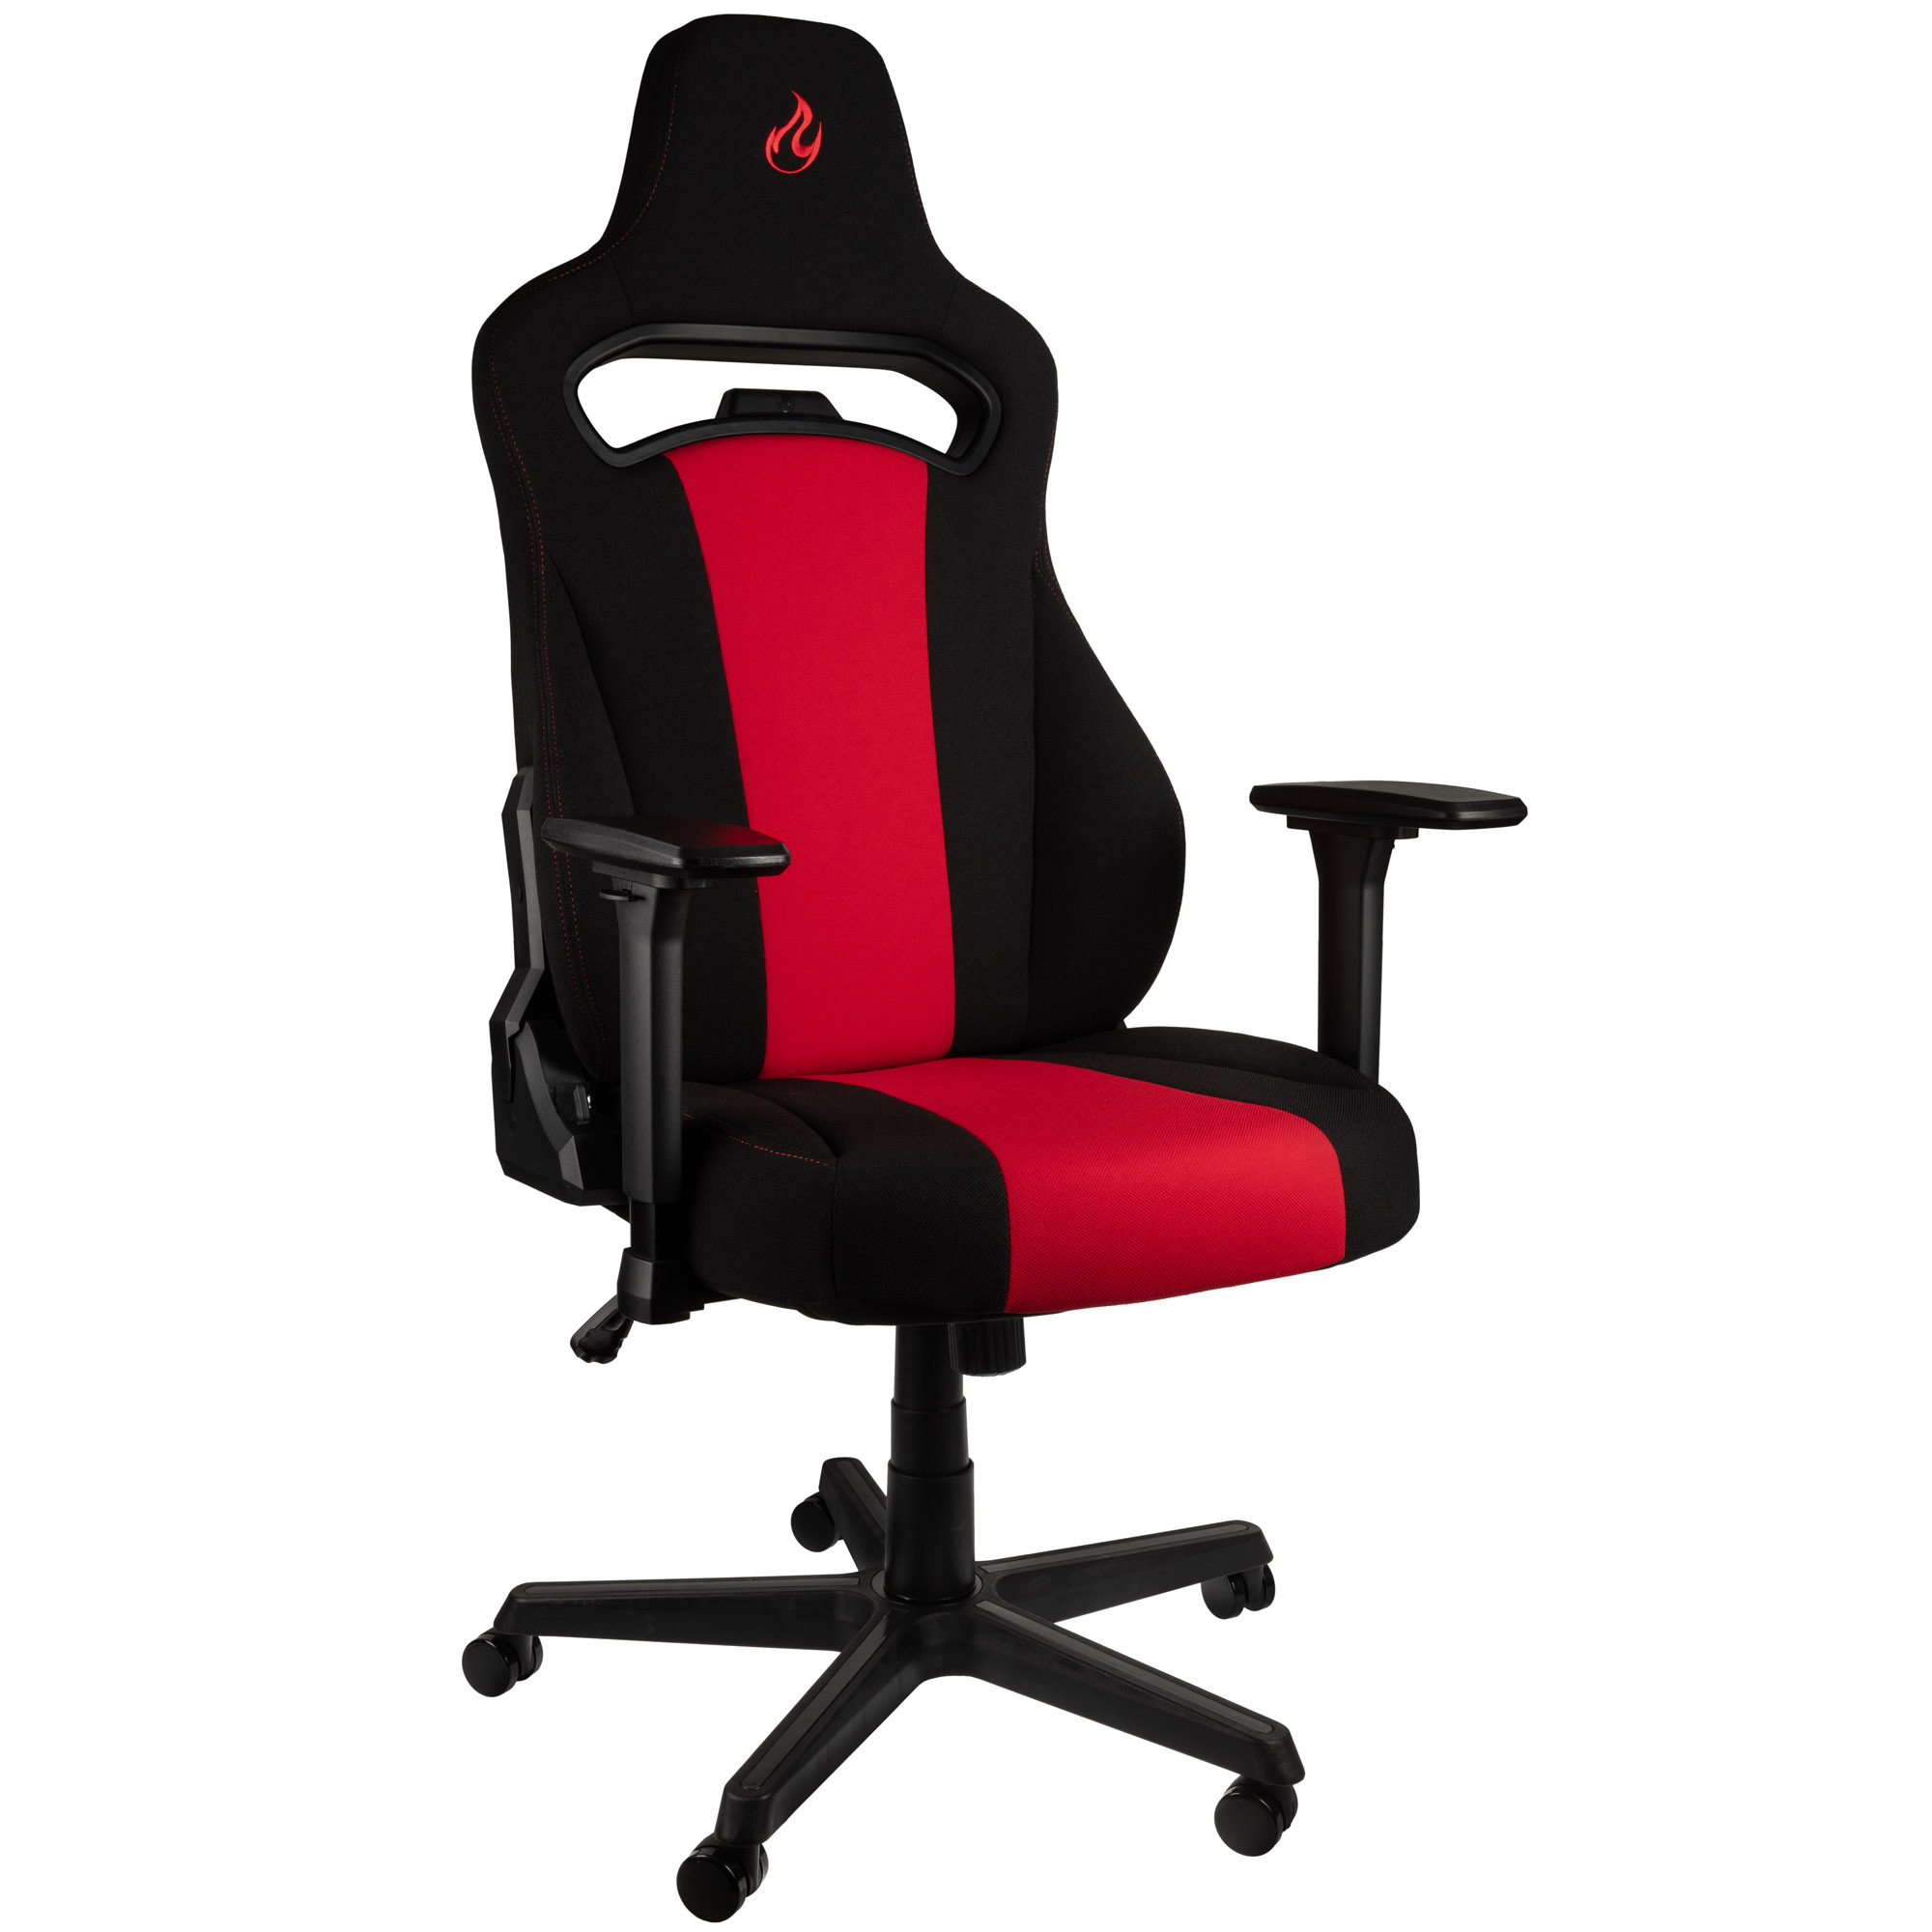  - E250 Gaming Chair Black/Red